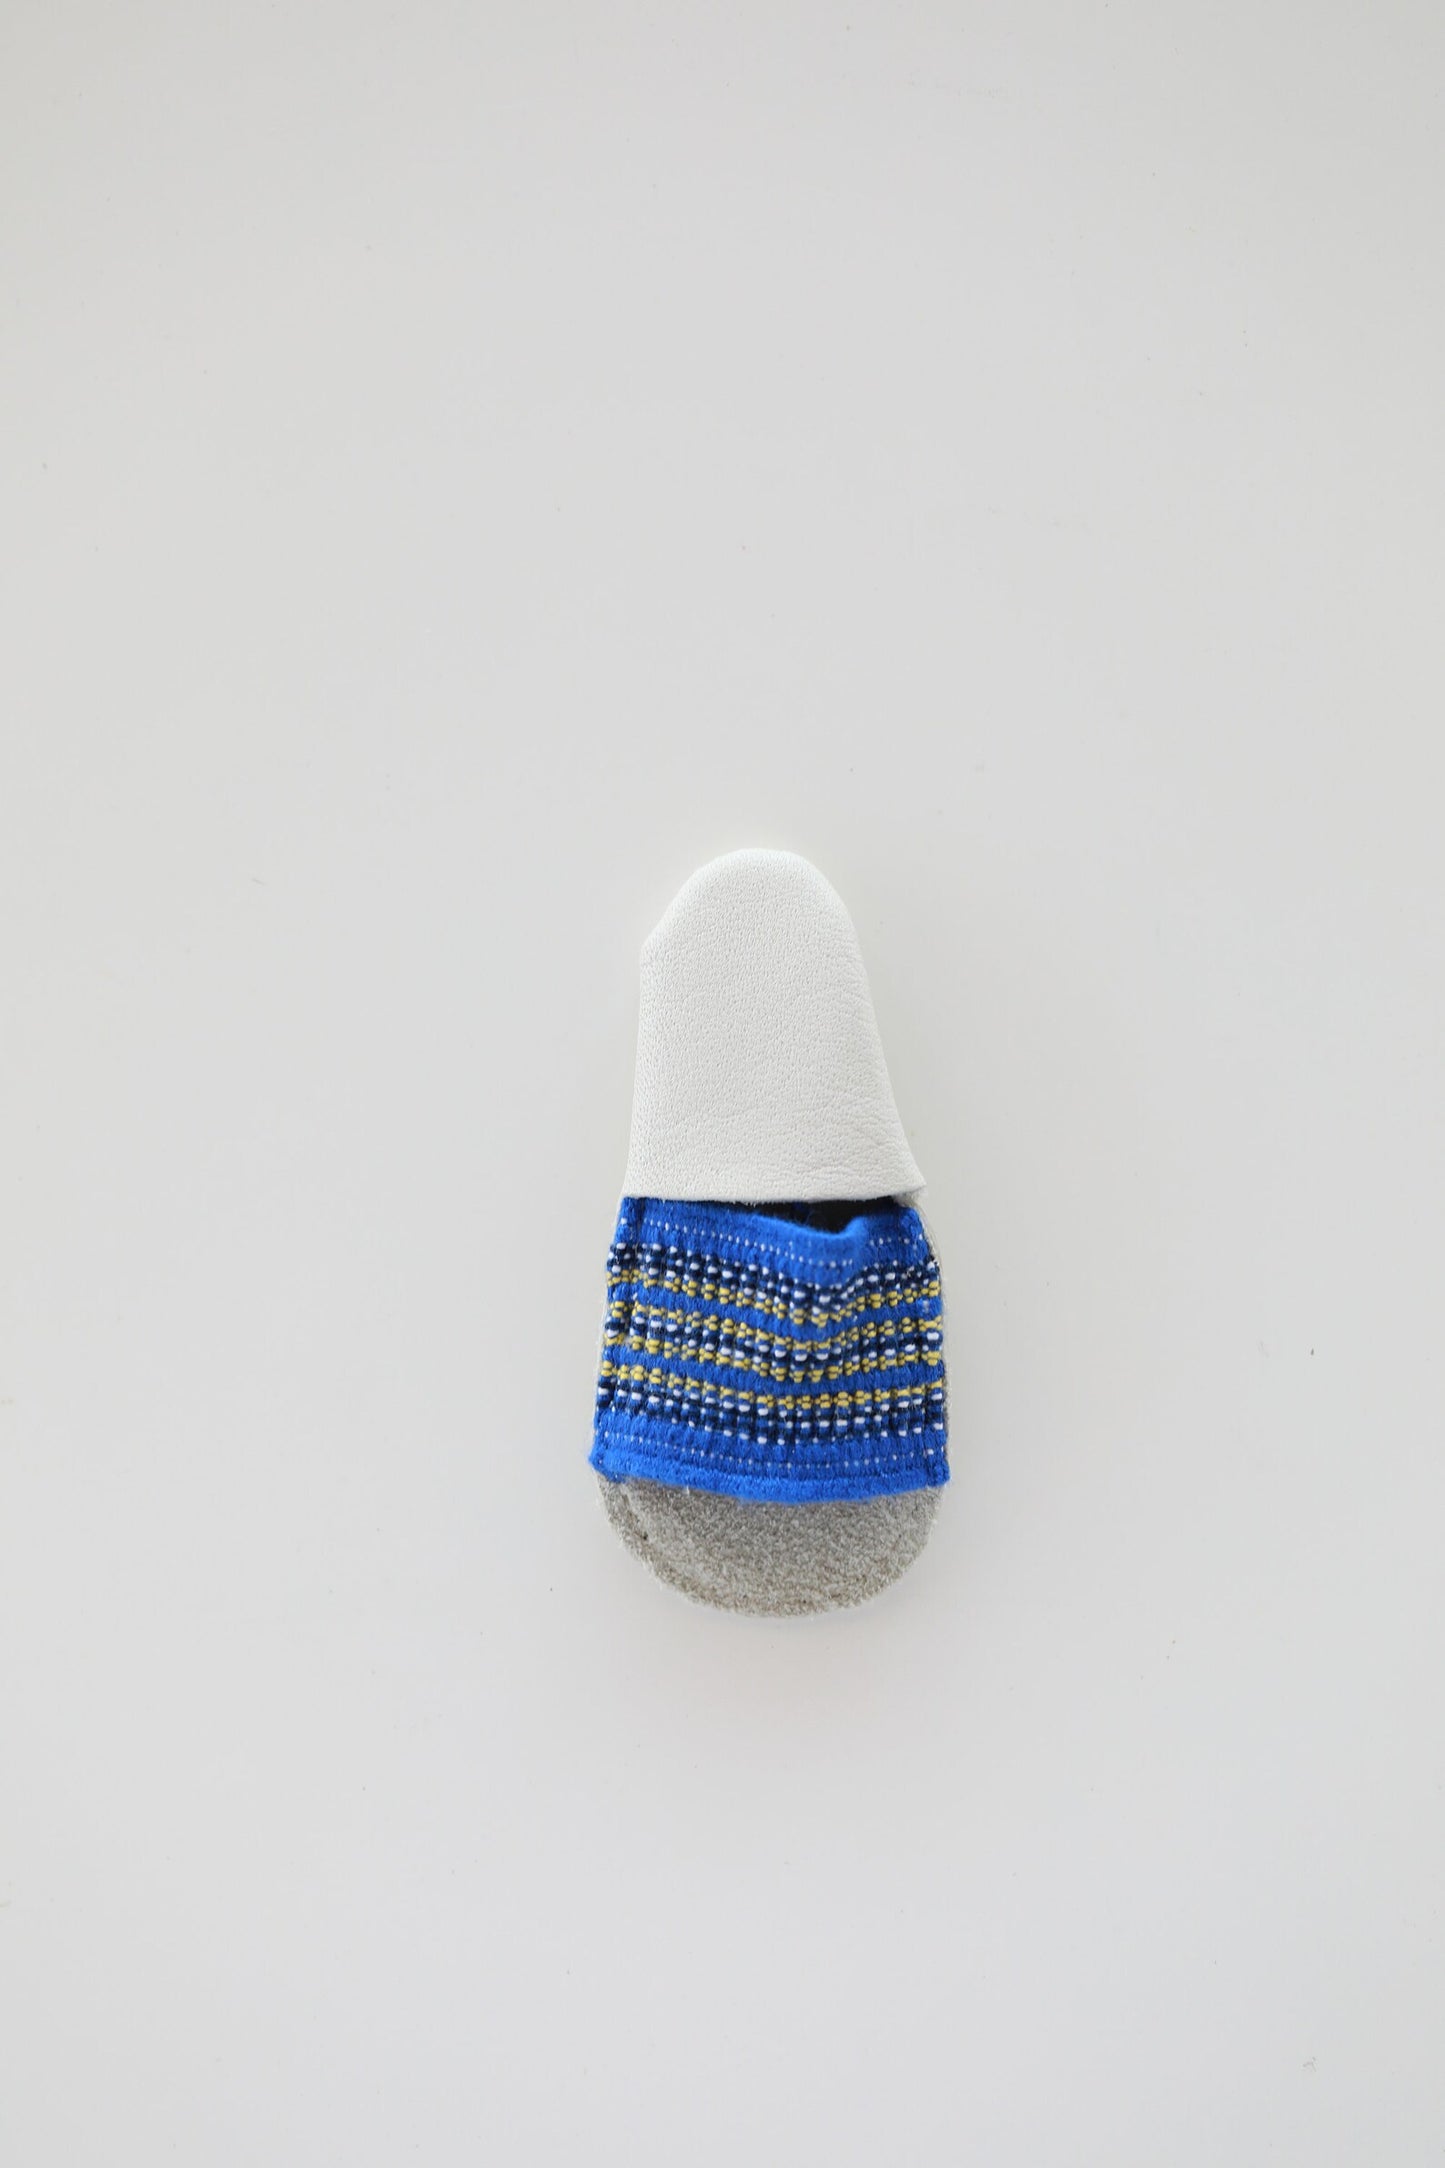 Little House leather glove thimble with elastic - soft or padded